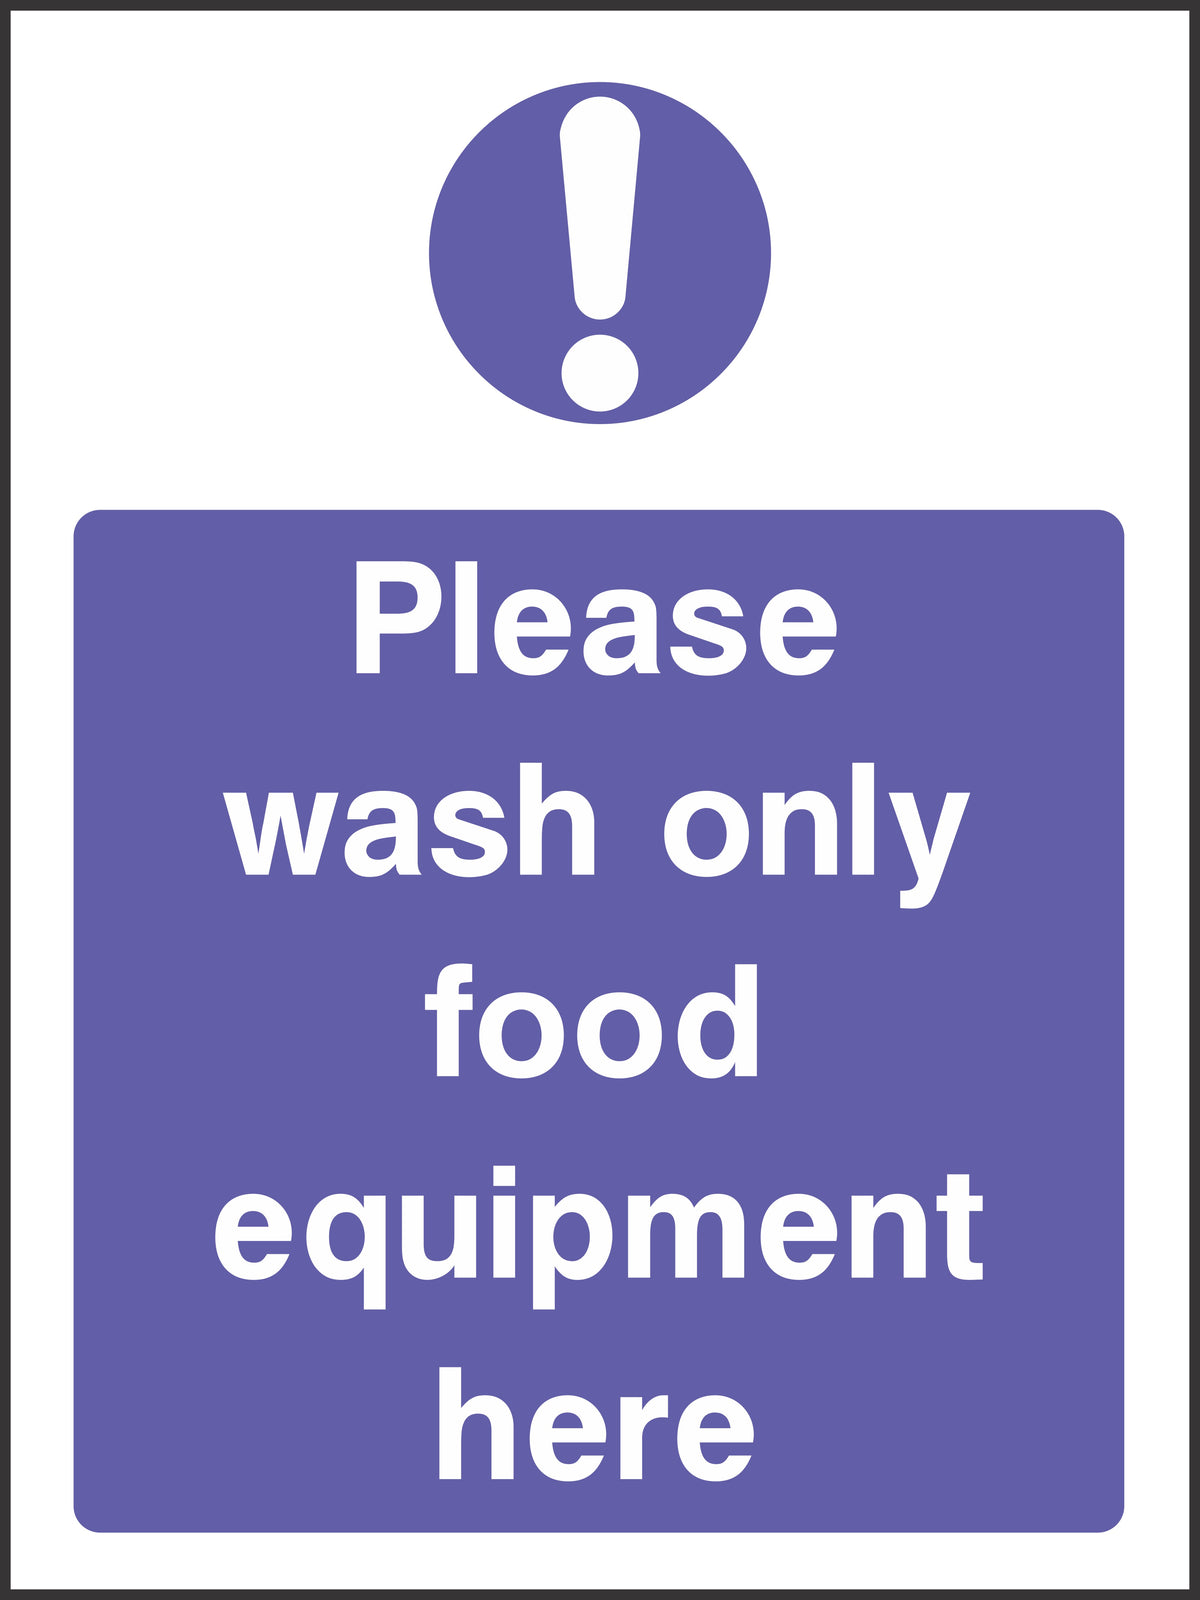 Please wash only food equipment here sign